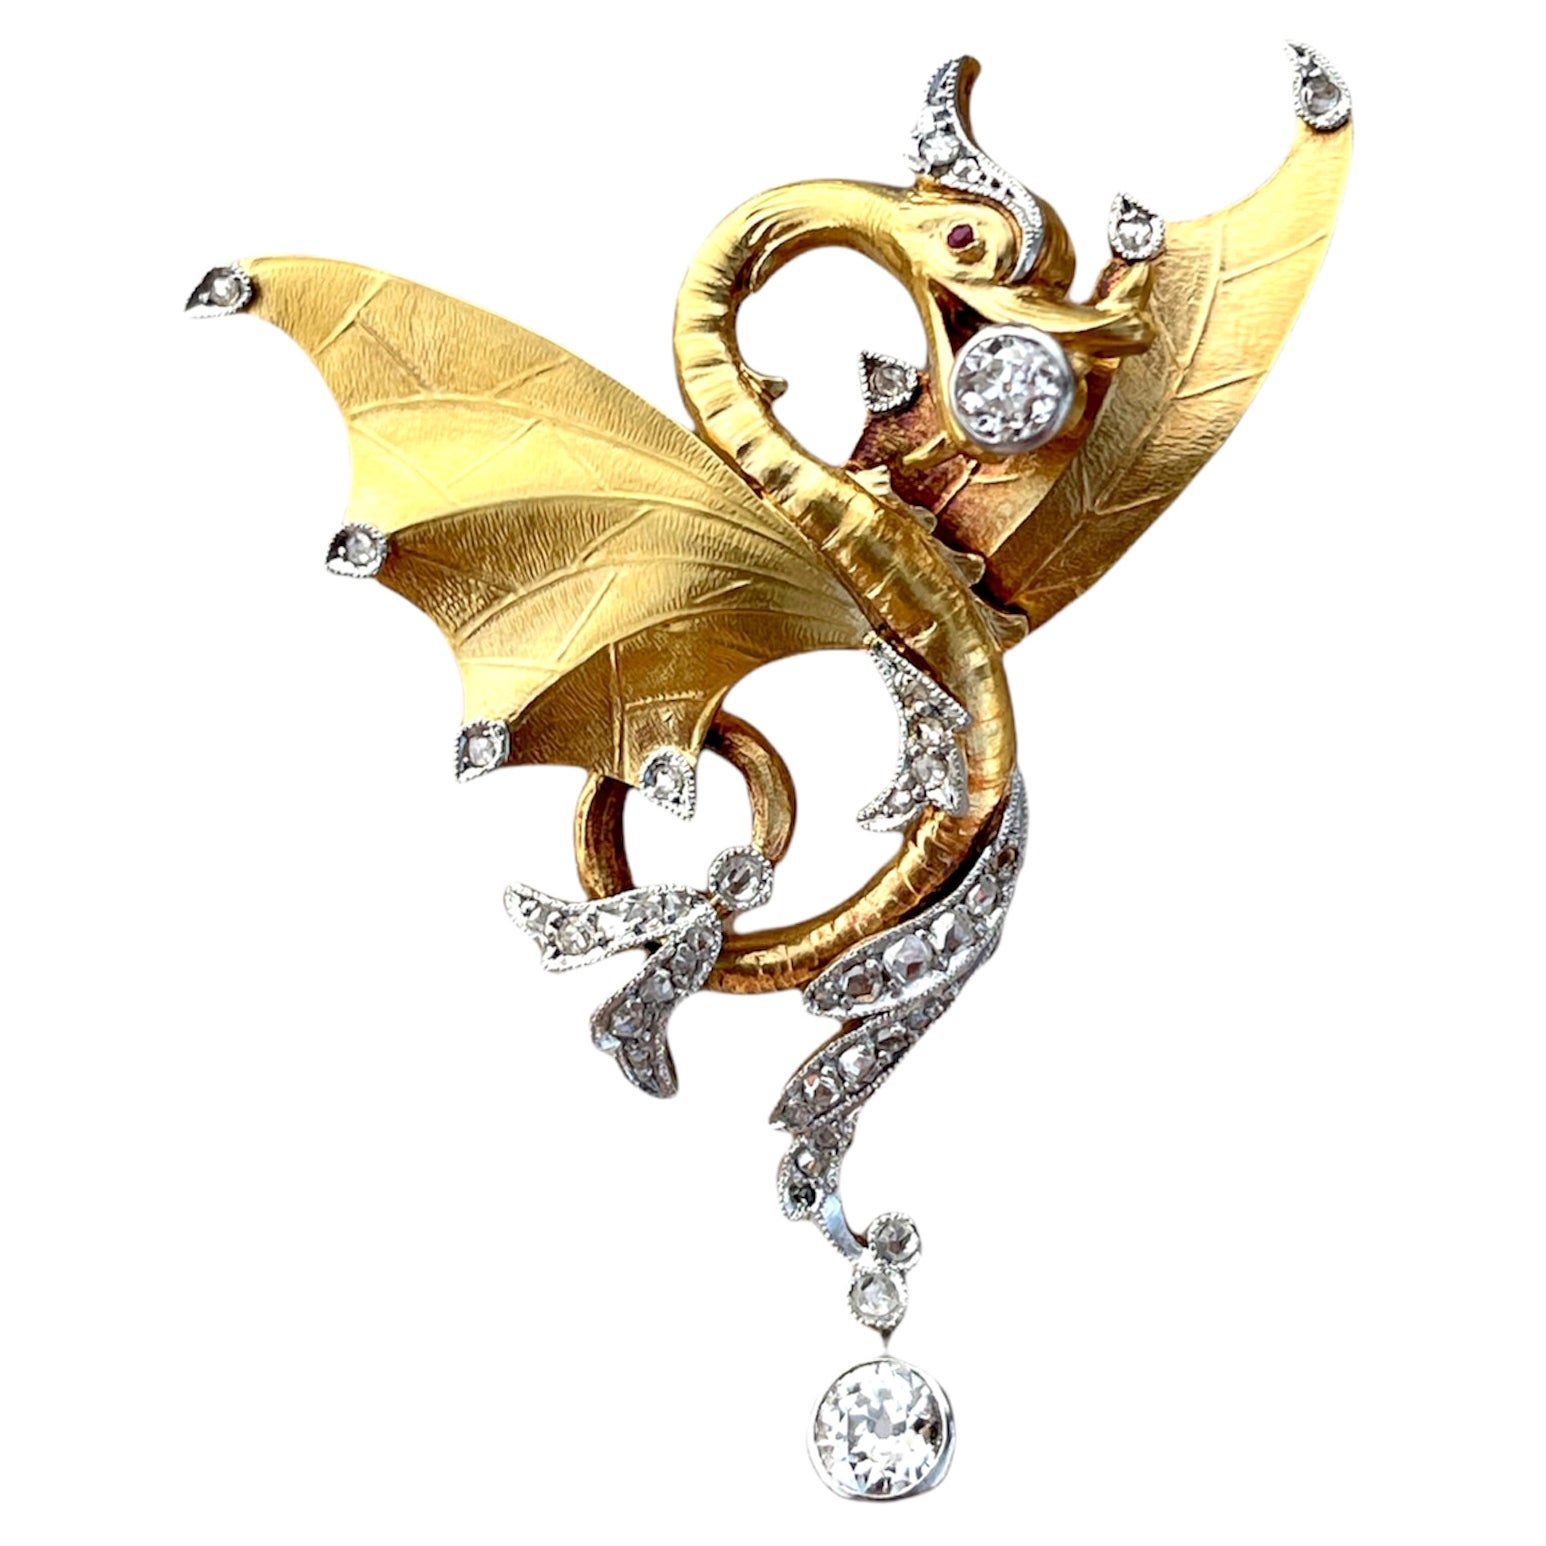  Animal Dragon Diamonds Gold 1890s Chinese Imperial Pendant or Brooch For Sale